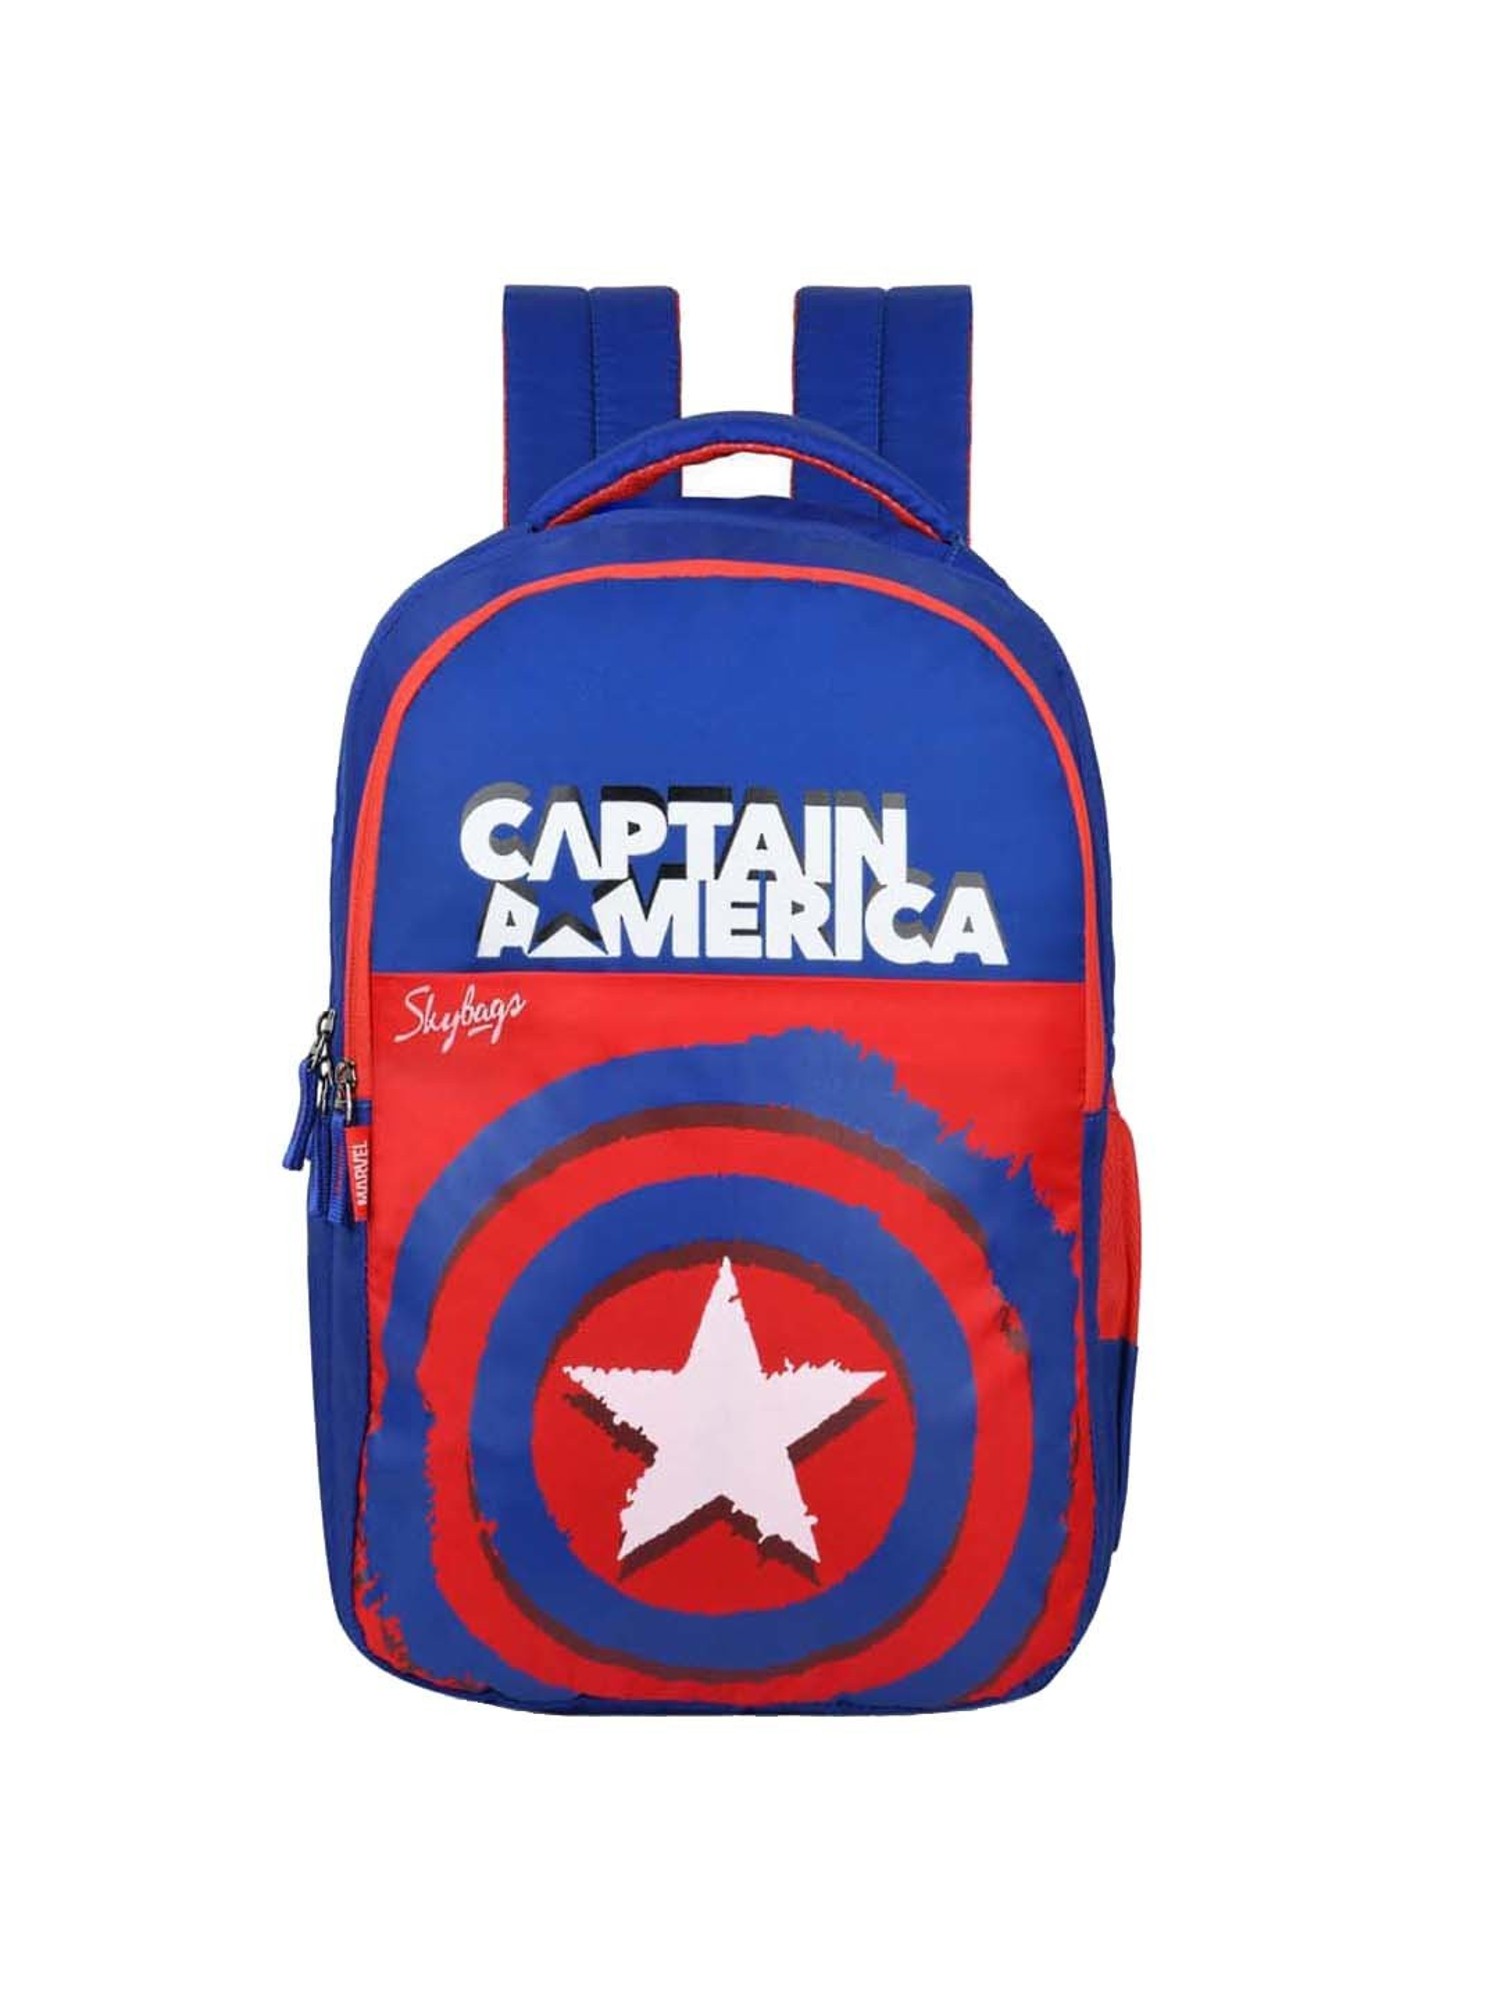 Buy Marvel Metallic Captain America Cosplay Mini Backpack at Loungefly.